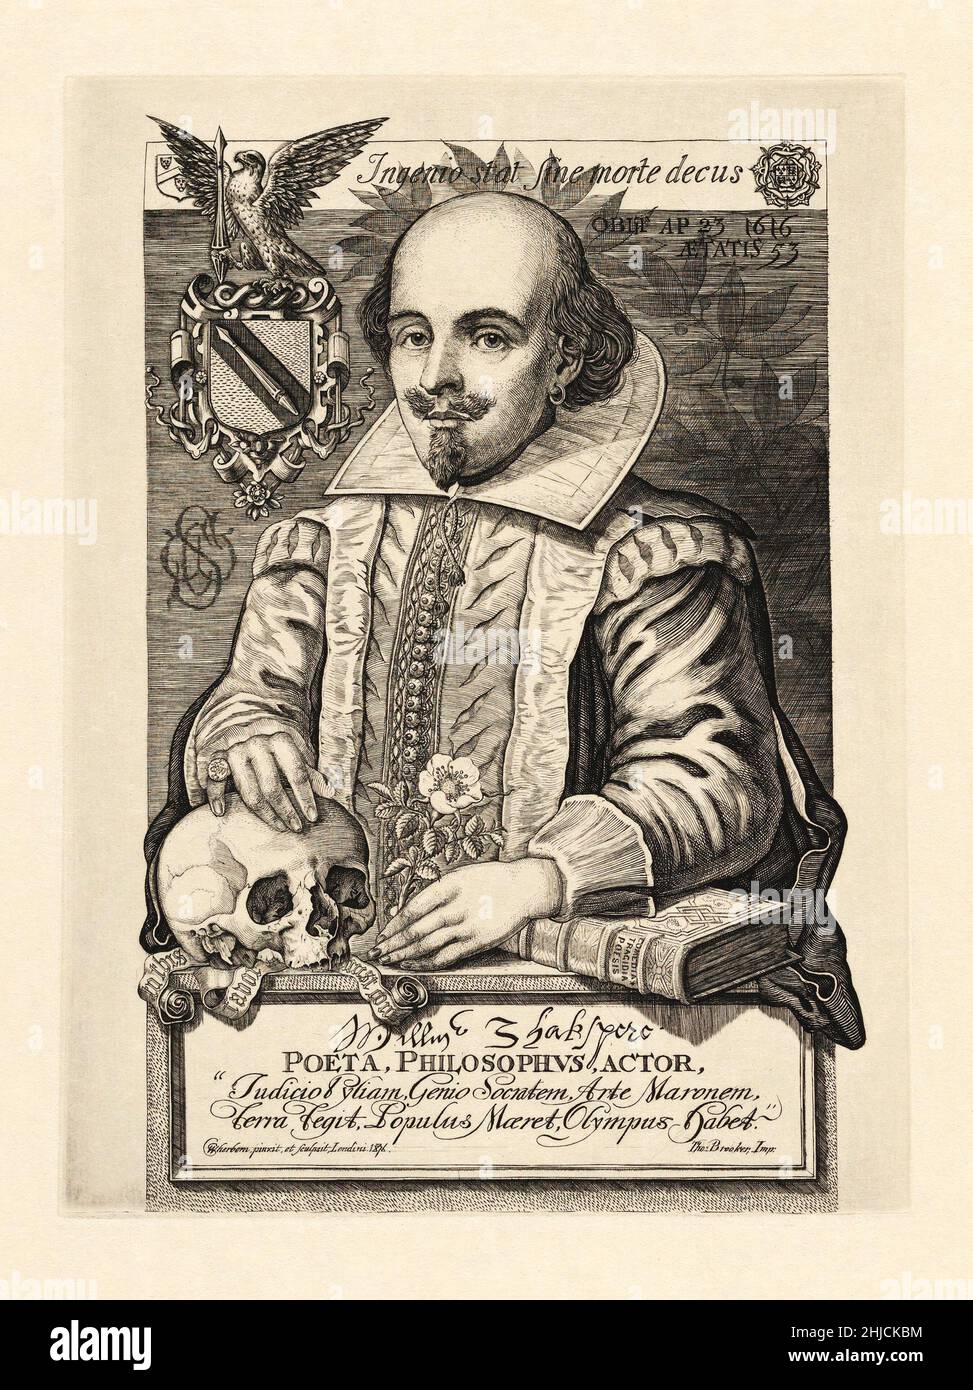 Derived from the famous sculpted effigy in Holy Trinity Church at Stratford-upon-Avon, this portrait shows Shakespeare wearing a doublet, winged collar, earring and goatee. Laurels behind the head form a secular halo, and the subject is surrounded by emblematic objects: a skull, Tudor rose, and volume labeled 'Comedia, Tragedia, Poesia,' with a plaque below lauding the Bard as poet, philosopher and actor. Engraving by Charles William Sherborn, circa 1876. Stock Photo